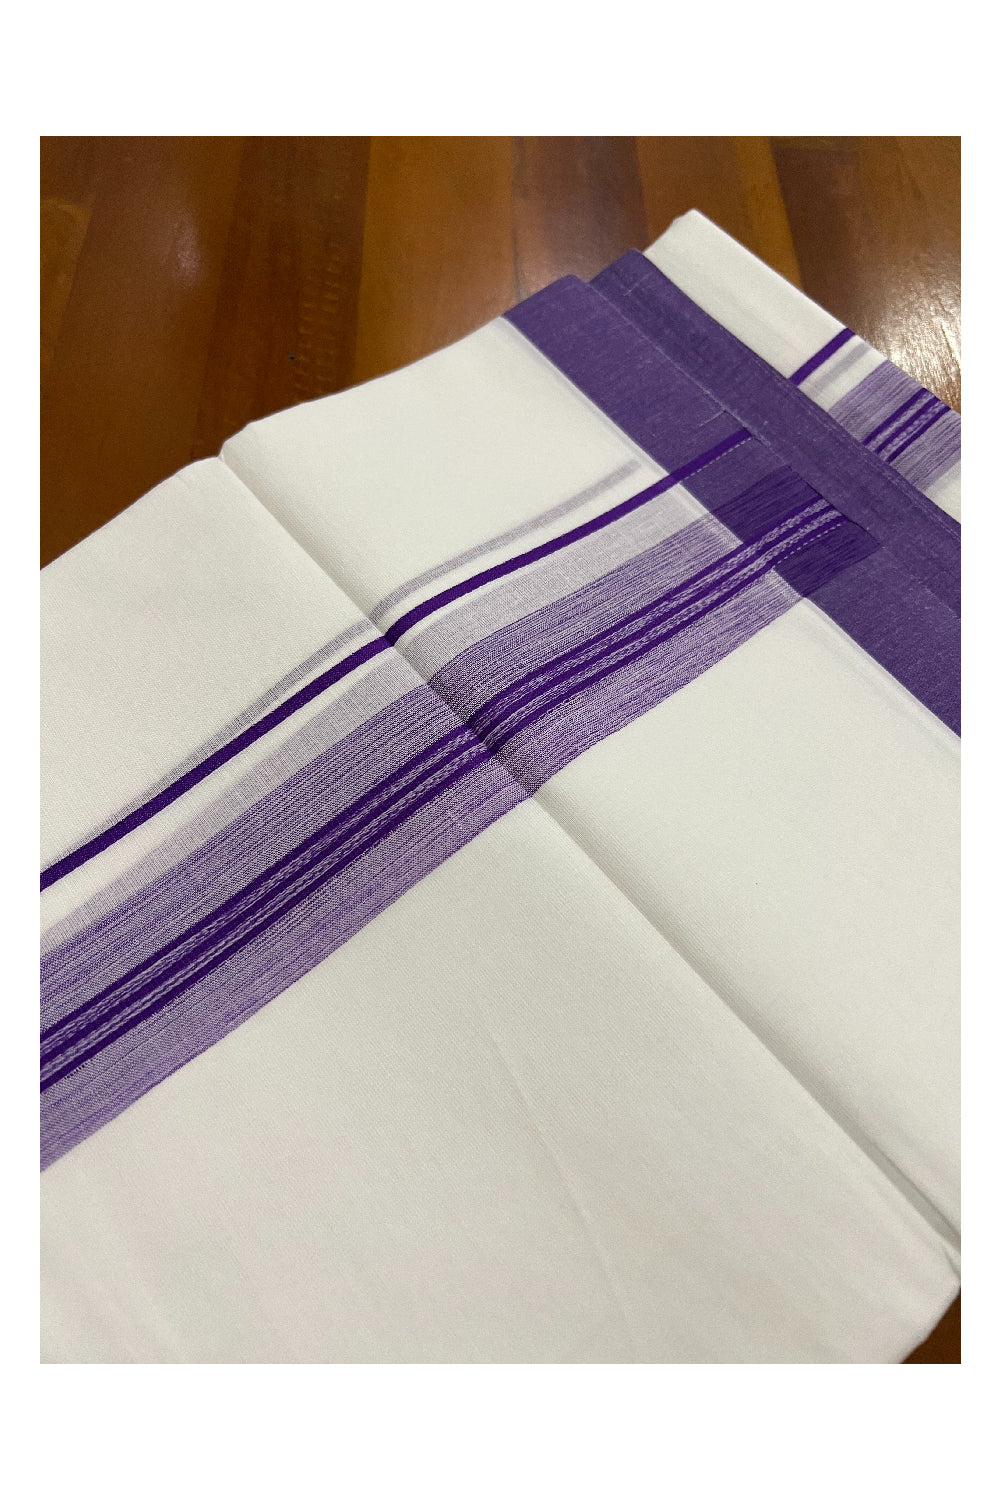 Pure White Kerala Cotton Double Mundu with Violet Border (South Indian Dhoti)